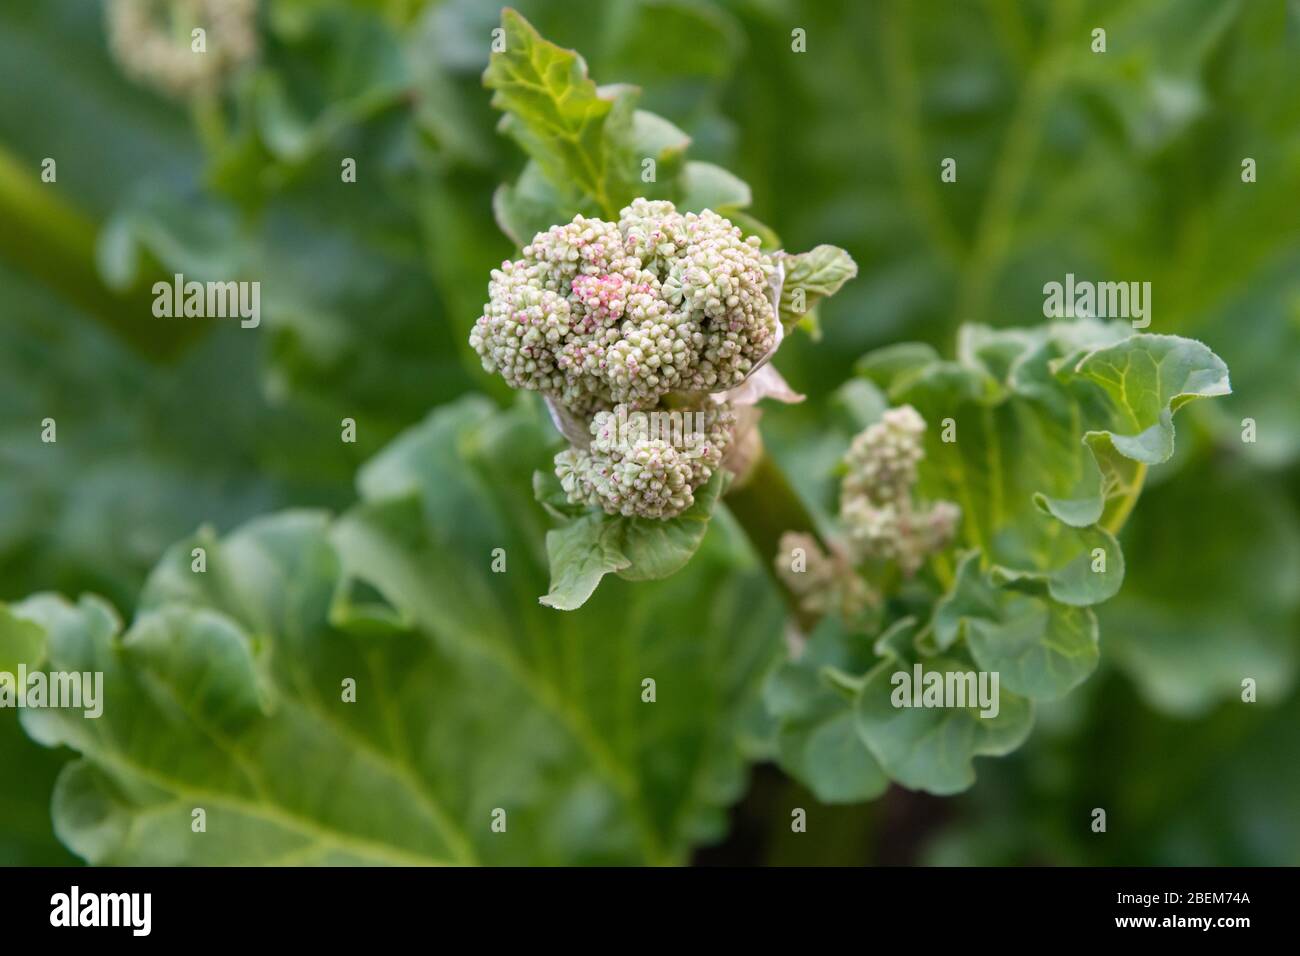 Rhubarb plant  in a garden Stock Photo